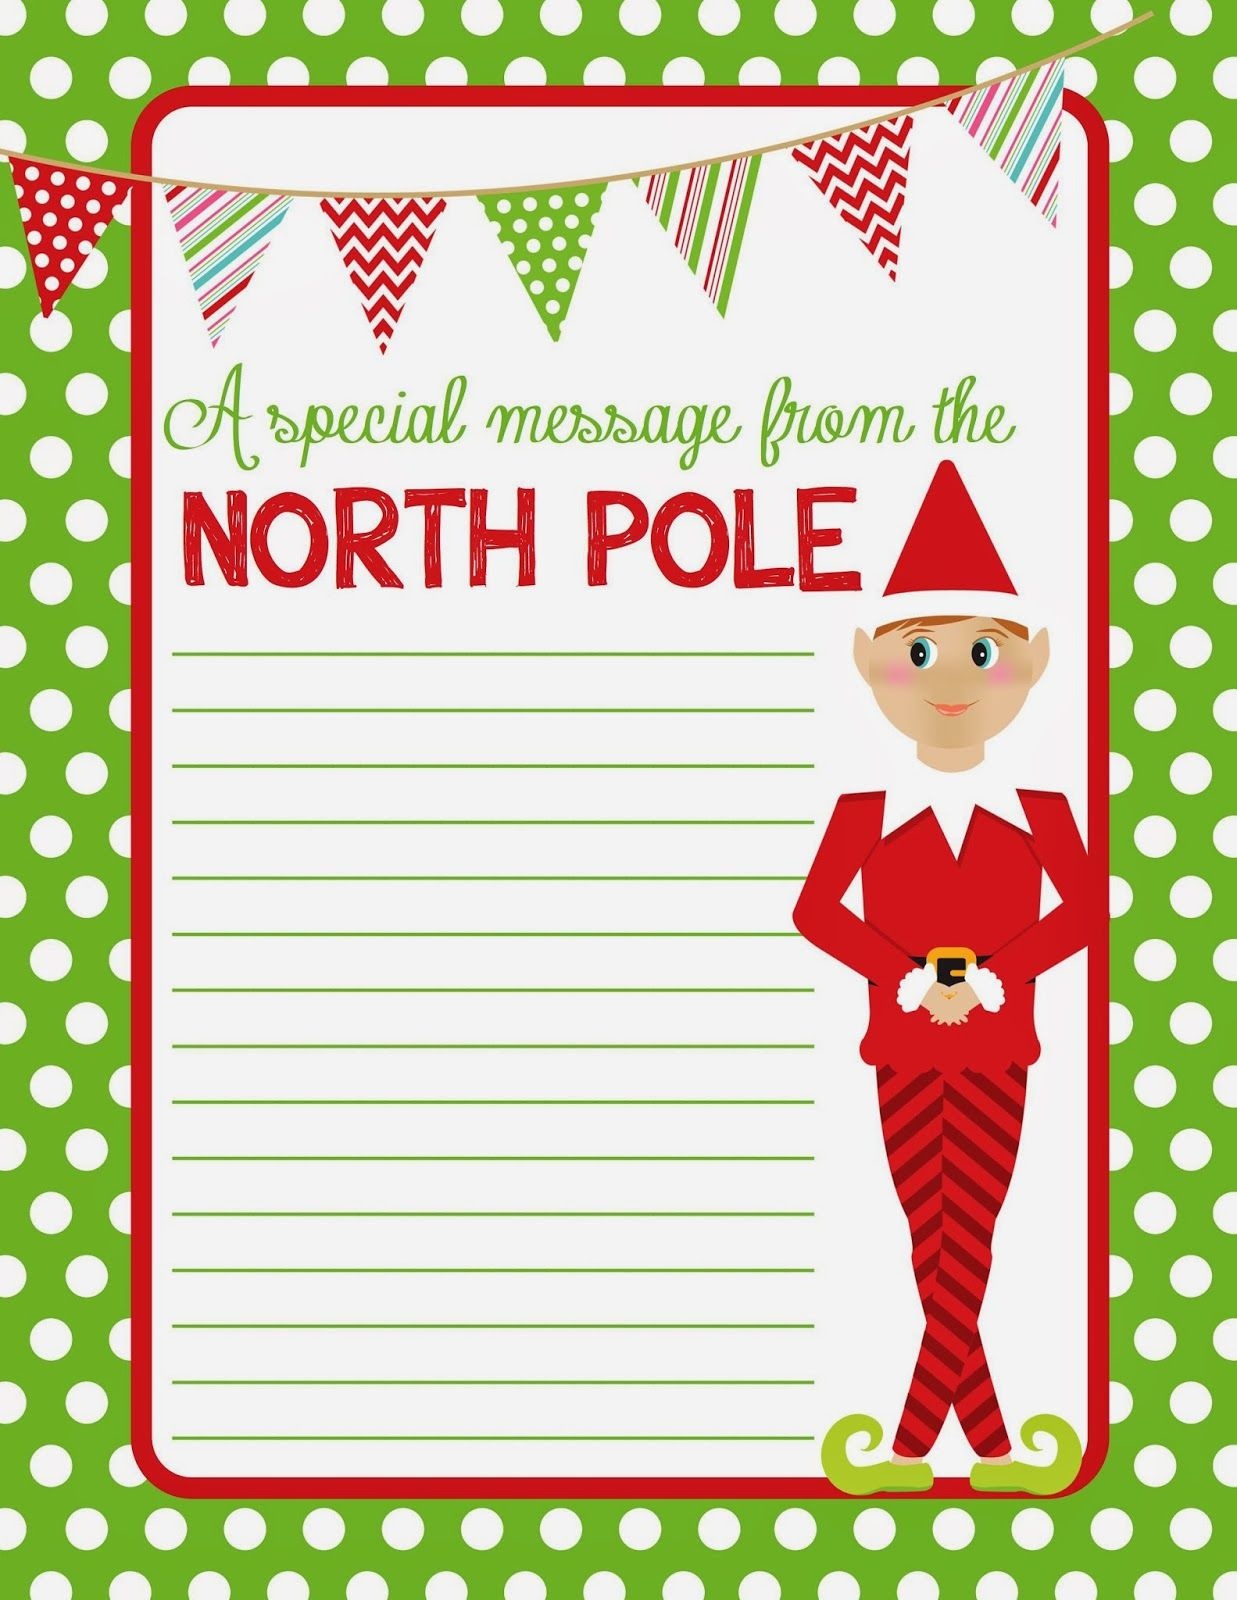 4 Best Images Of Elf On The Shelf Free Printable Christmas Paper - Free Printable Christmas Border Paper